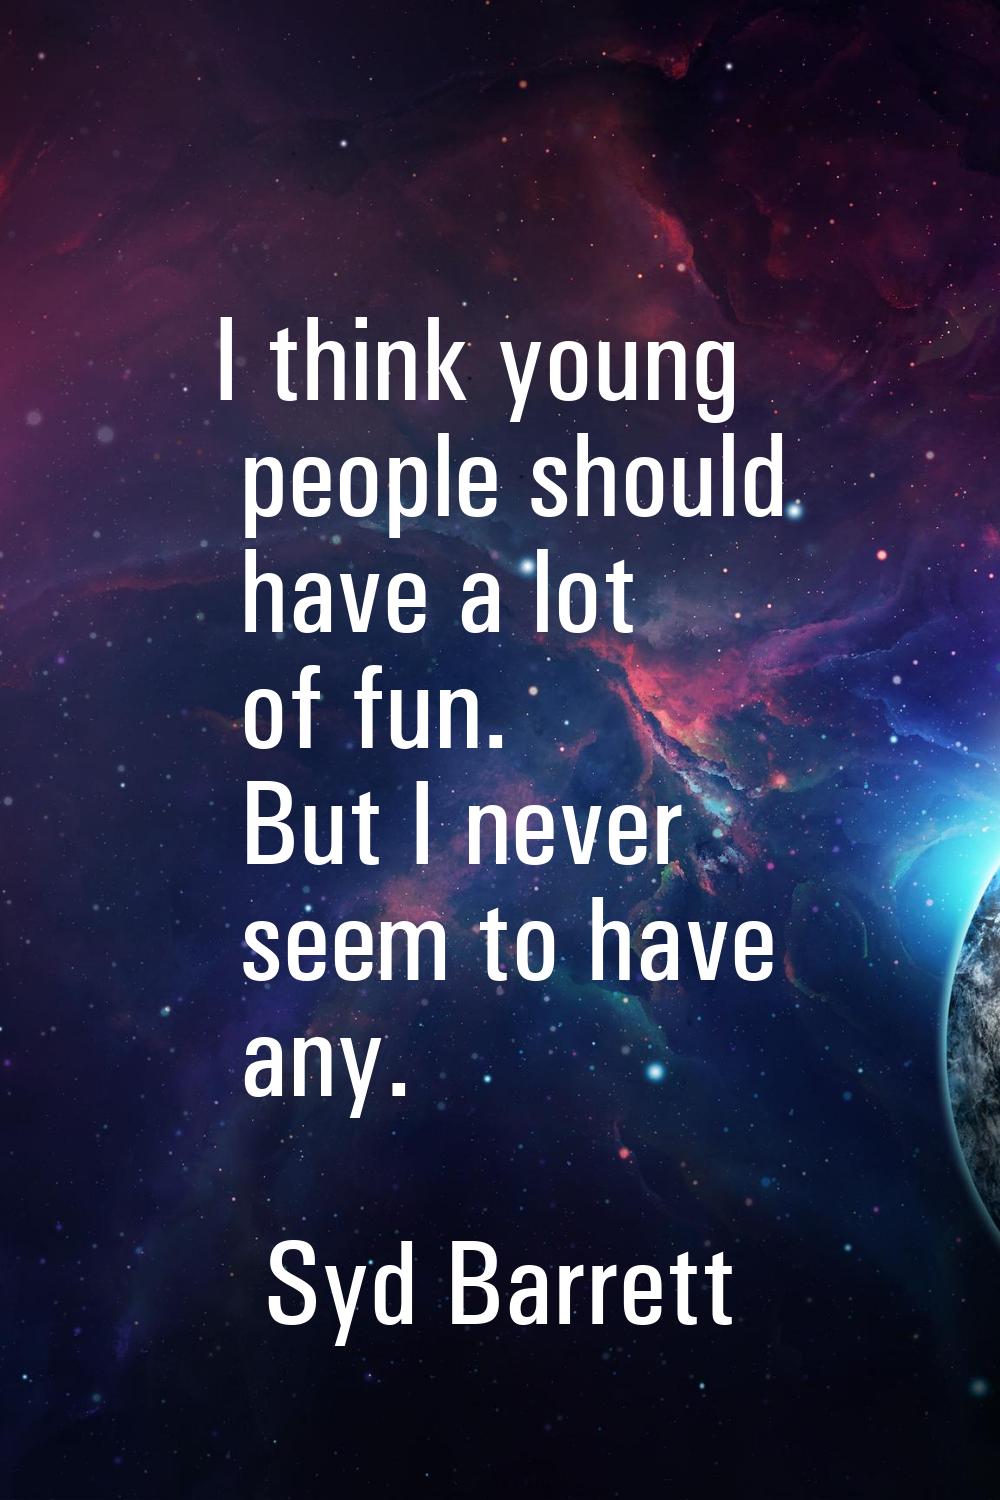 I think young people should have a lot of fun. But I never seem to have any.